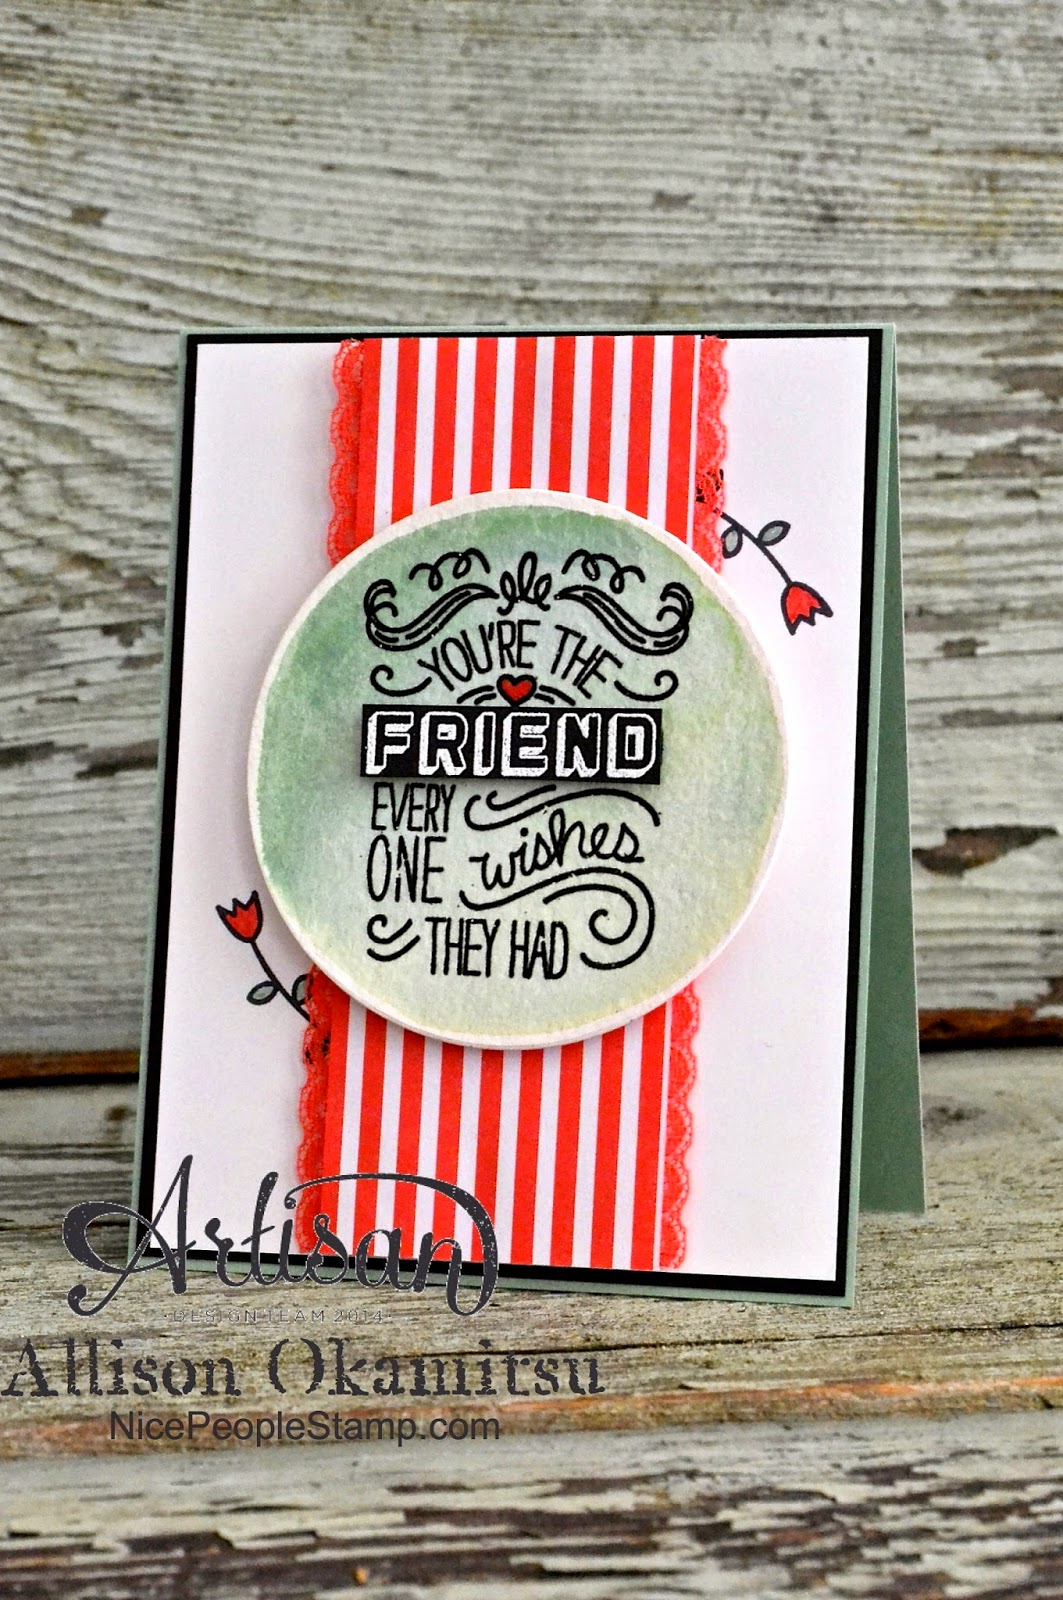 http://nicepeoplestamp.blogspot.com/2015/05/friendly-wishes-w-mint-macaron.html